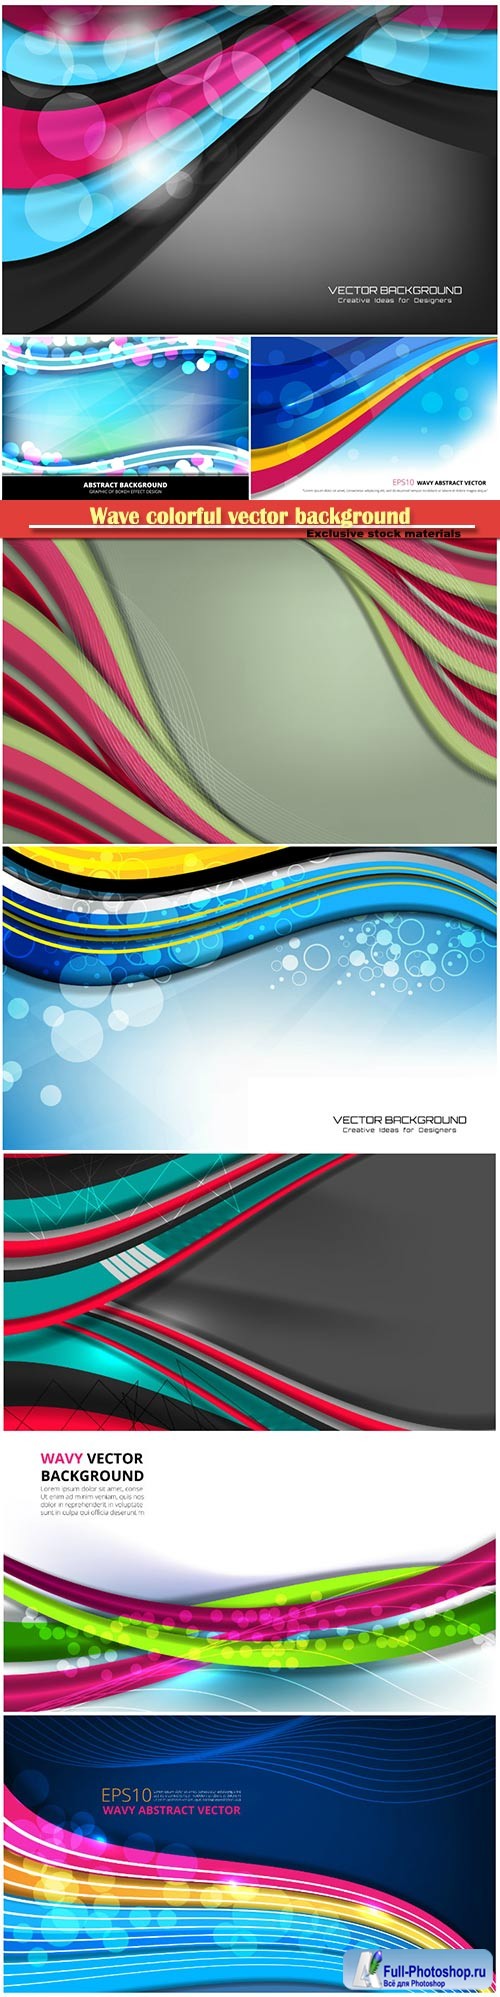 Wave colorful vector background